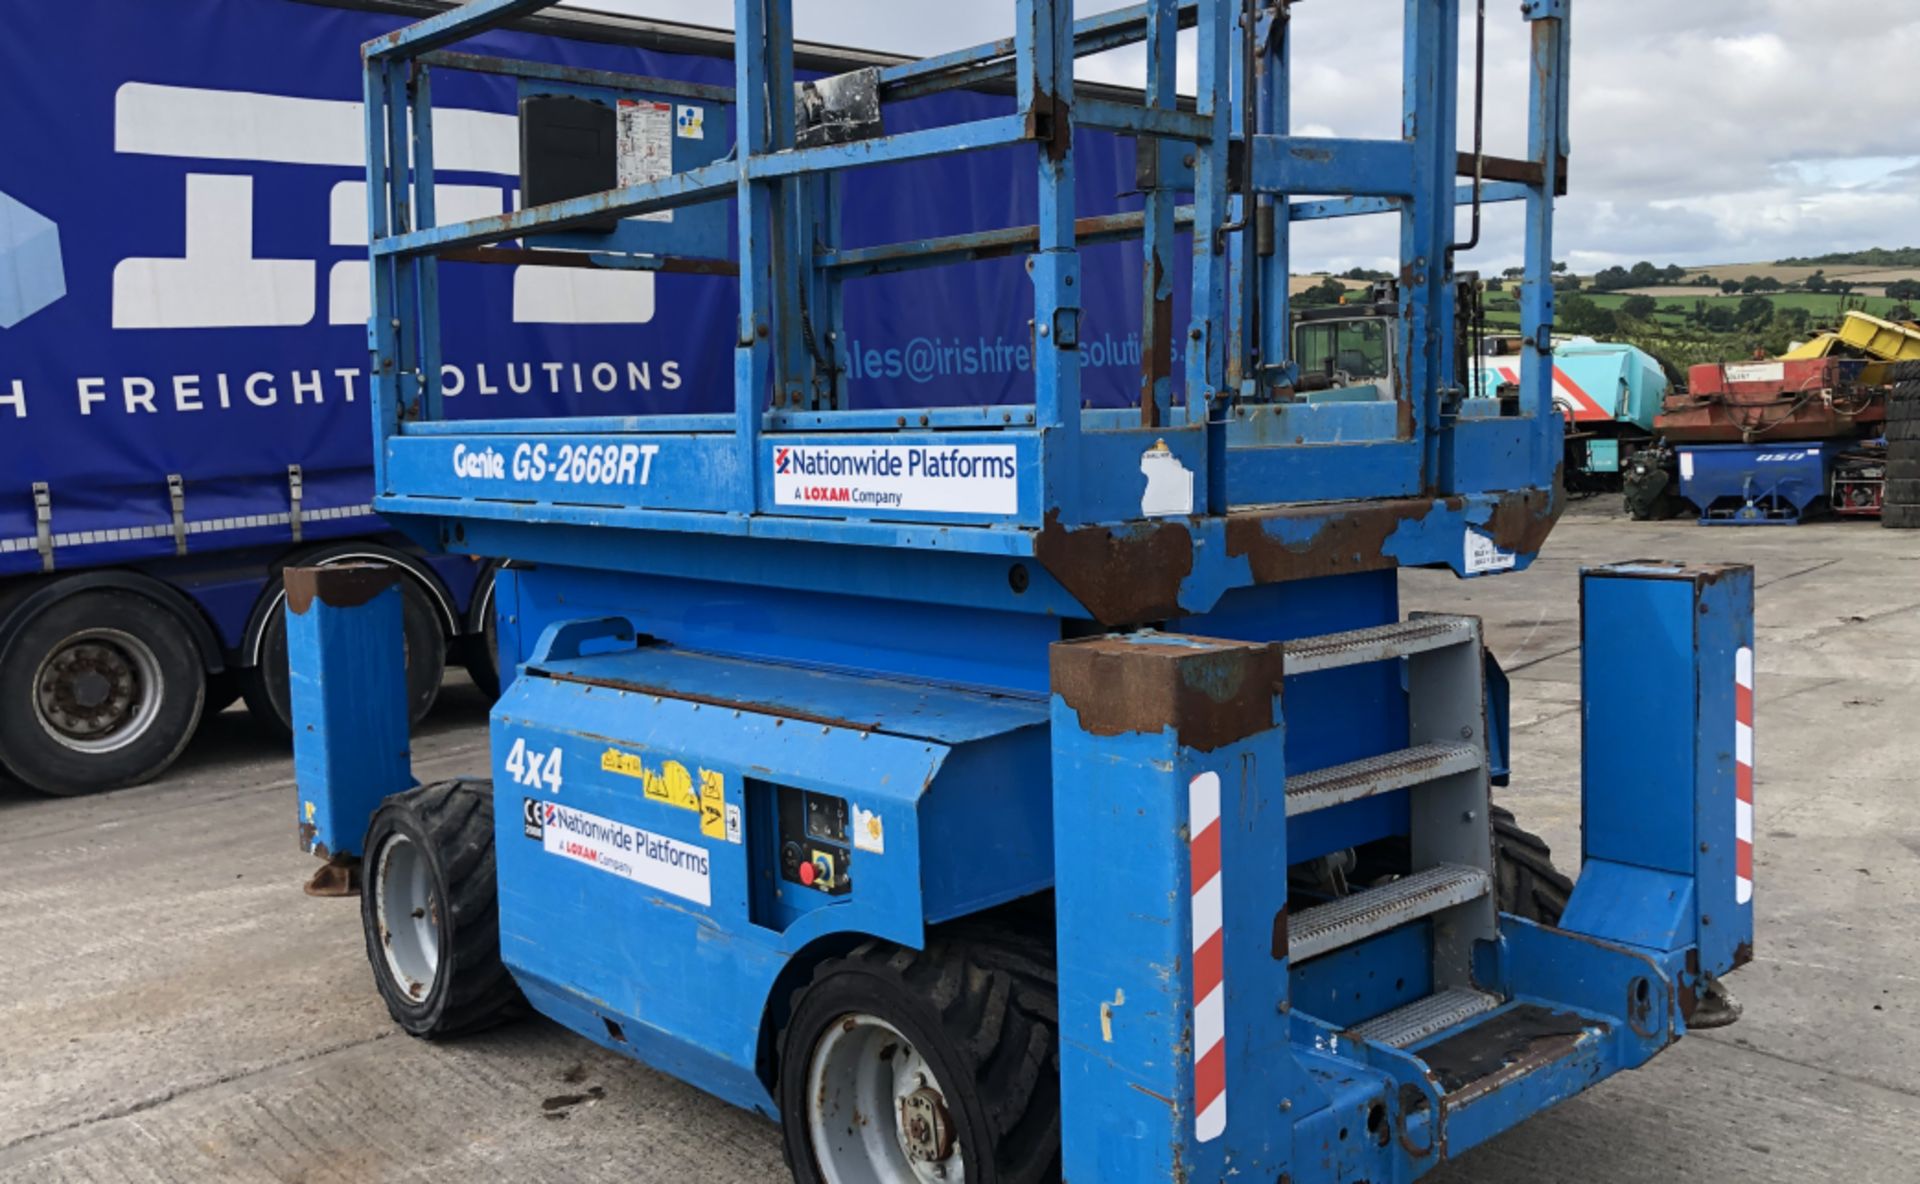 4×4 SIZZLER LIFT | 10M LIFT 2008 GENIE GS 2668 RT - Image 11 of 15